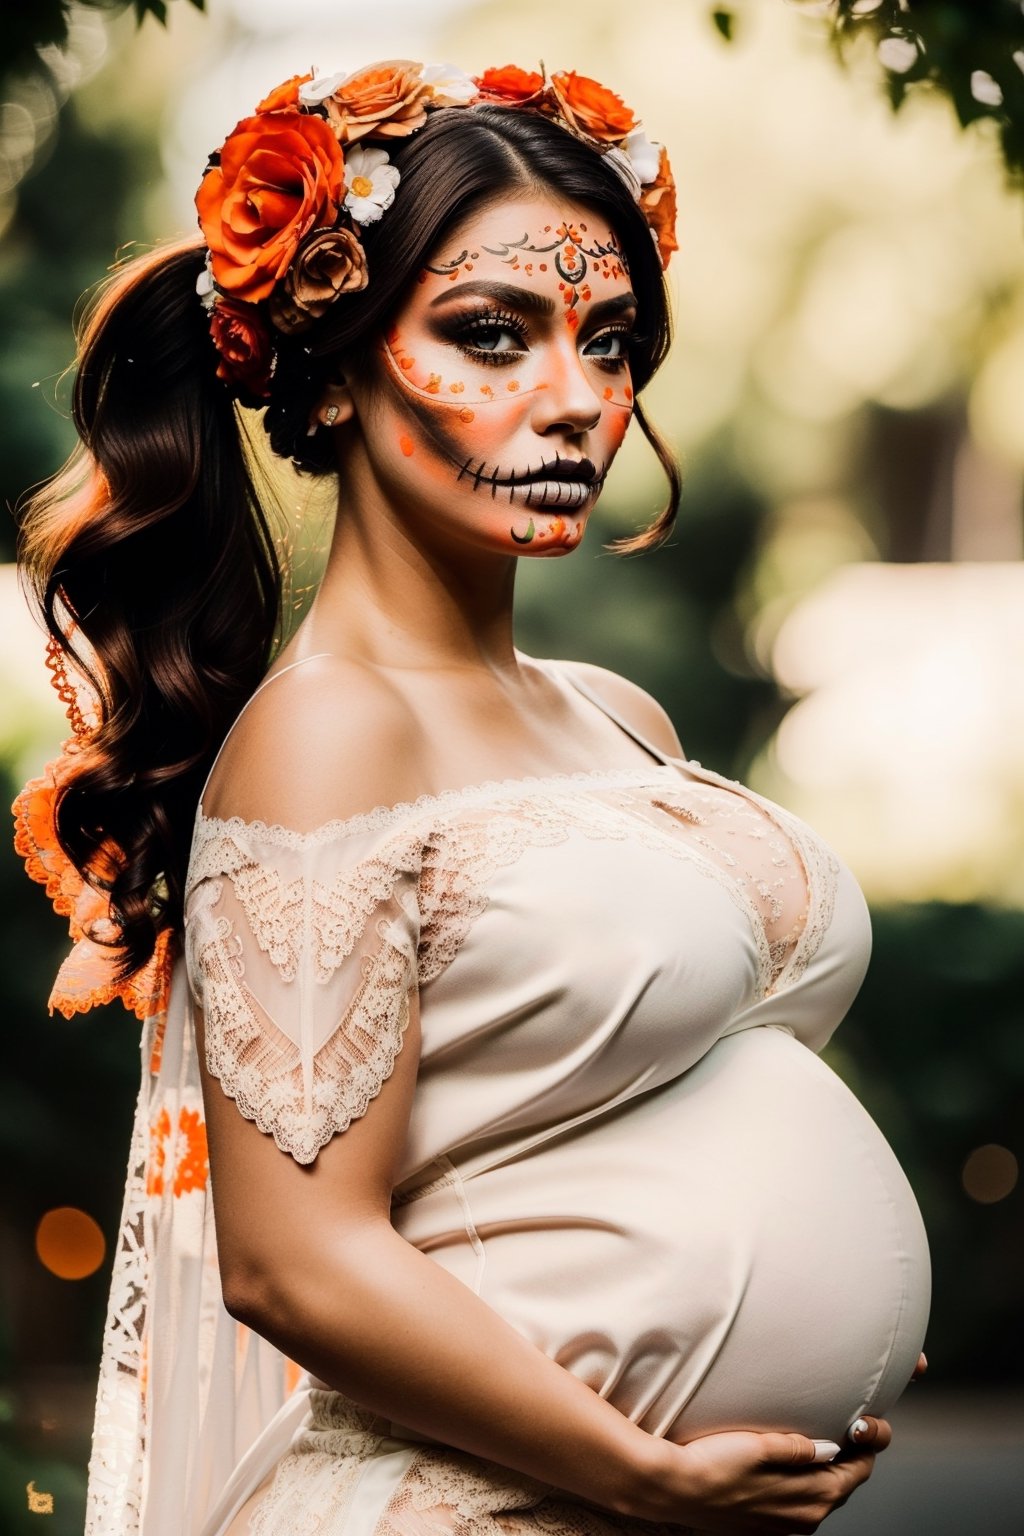 Best quality,8k,32k,Masterpiece, (UHD::1.2),full body potrait of a young woman with Catrina makeup ((latina)), ((hazel_eyes, bright)), extremely detailed eyes, dia de los muertos,(white make up,orange,black makeup,emulating a skull with the make up,orange flowers as ornament in hair),many orange flowers,attractive features,eyes,eyelid,focus,depth of field,film grain,ray tracing,contrast lipstick,slim model,backlit,(impossible_fit),((pregnant, fit)),(((wearing vintage lace mexican gown))),((large_breasts)), absolute_cleavage,plump breasts, detailed natural real skin texture,visible skin pores,anatomically correct,night,Coyoacán background,Catrina,secuctive,photo of perfecteyes eyes,((brown shoulder length hair, tight pony tail, short pony tail))